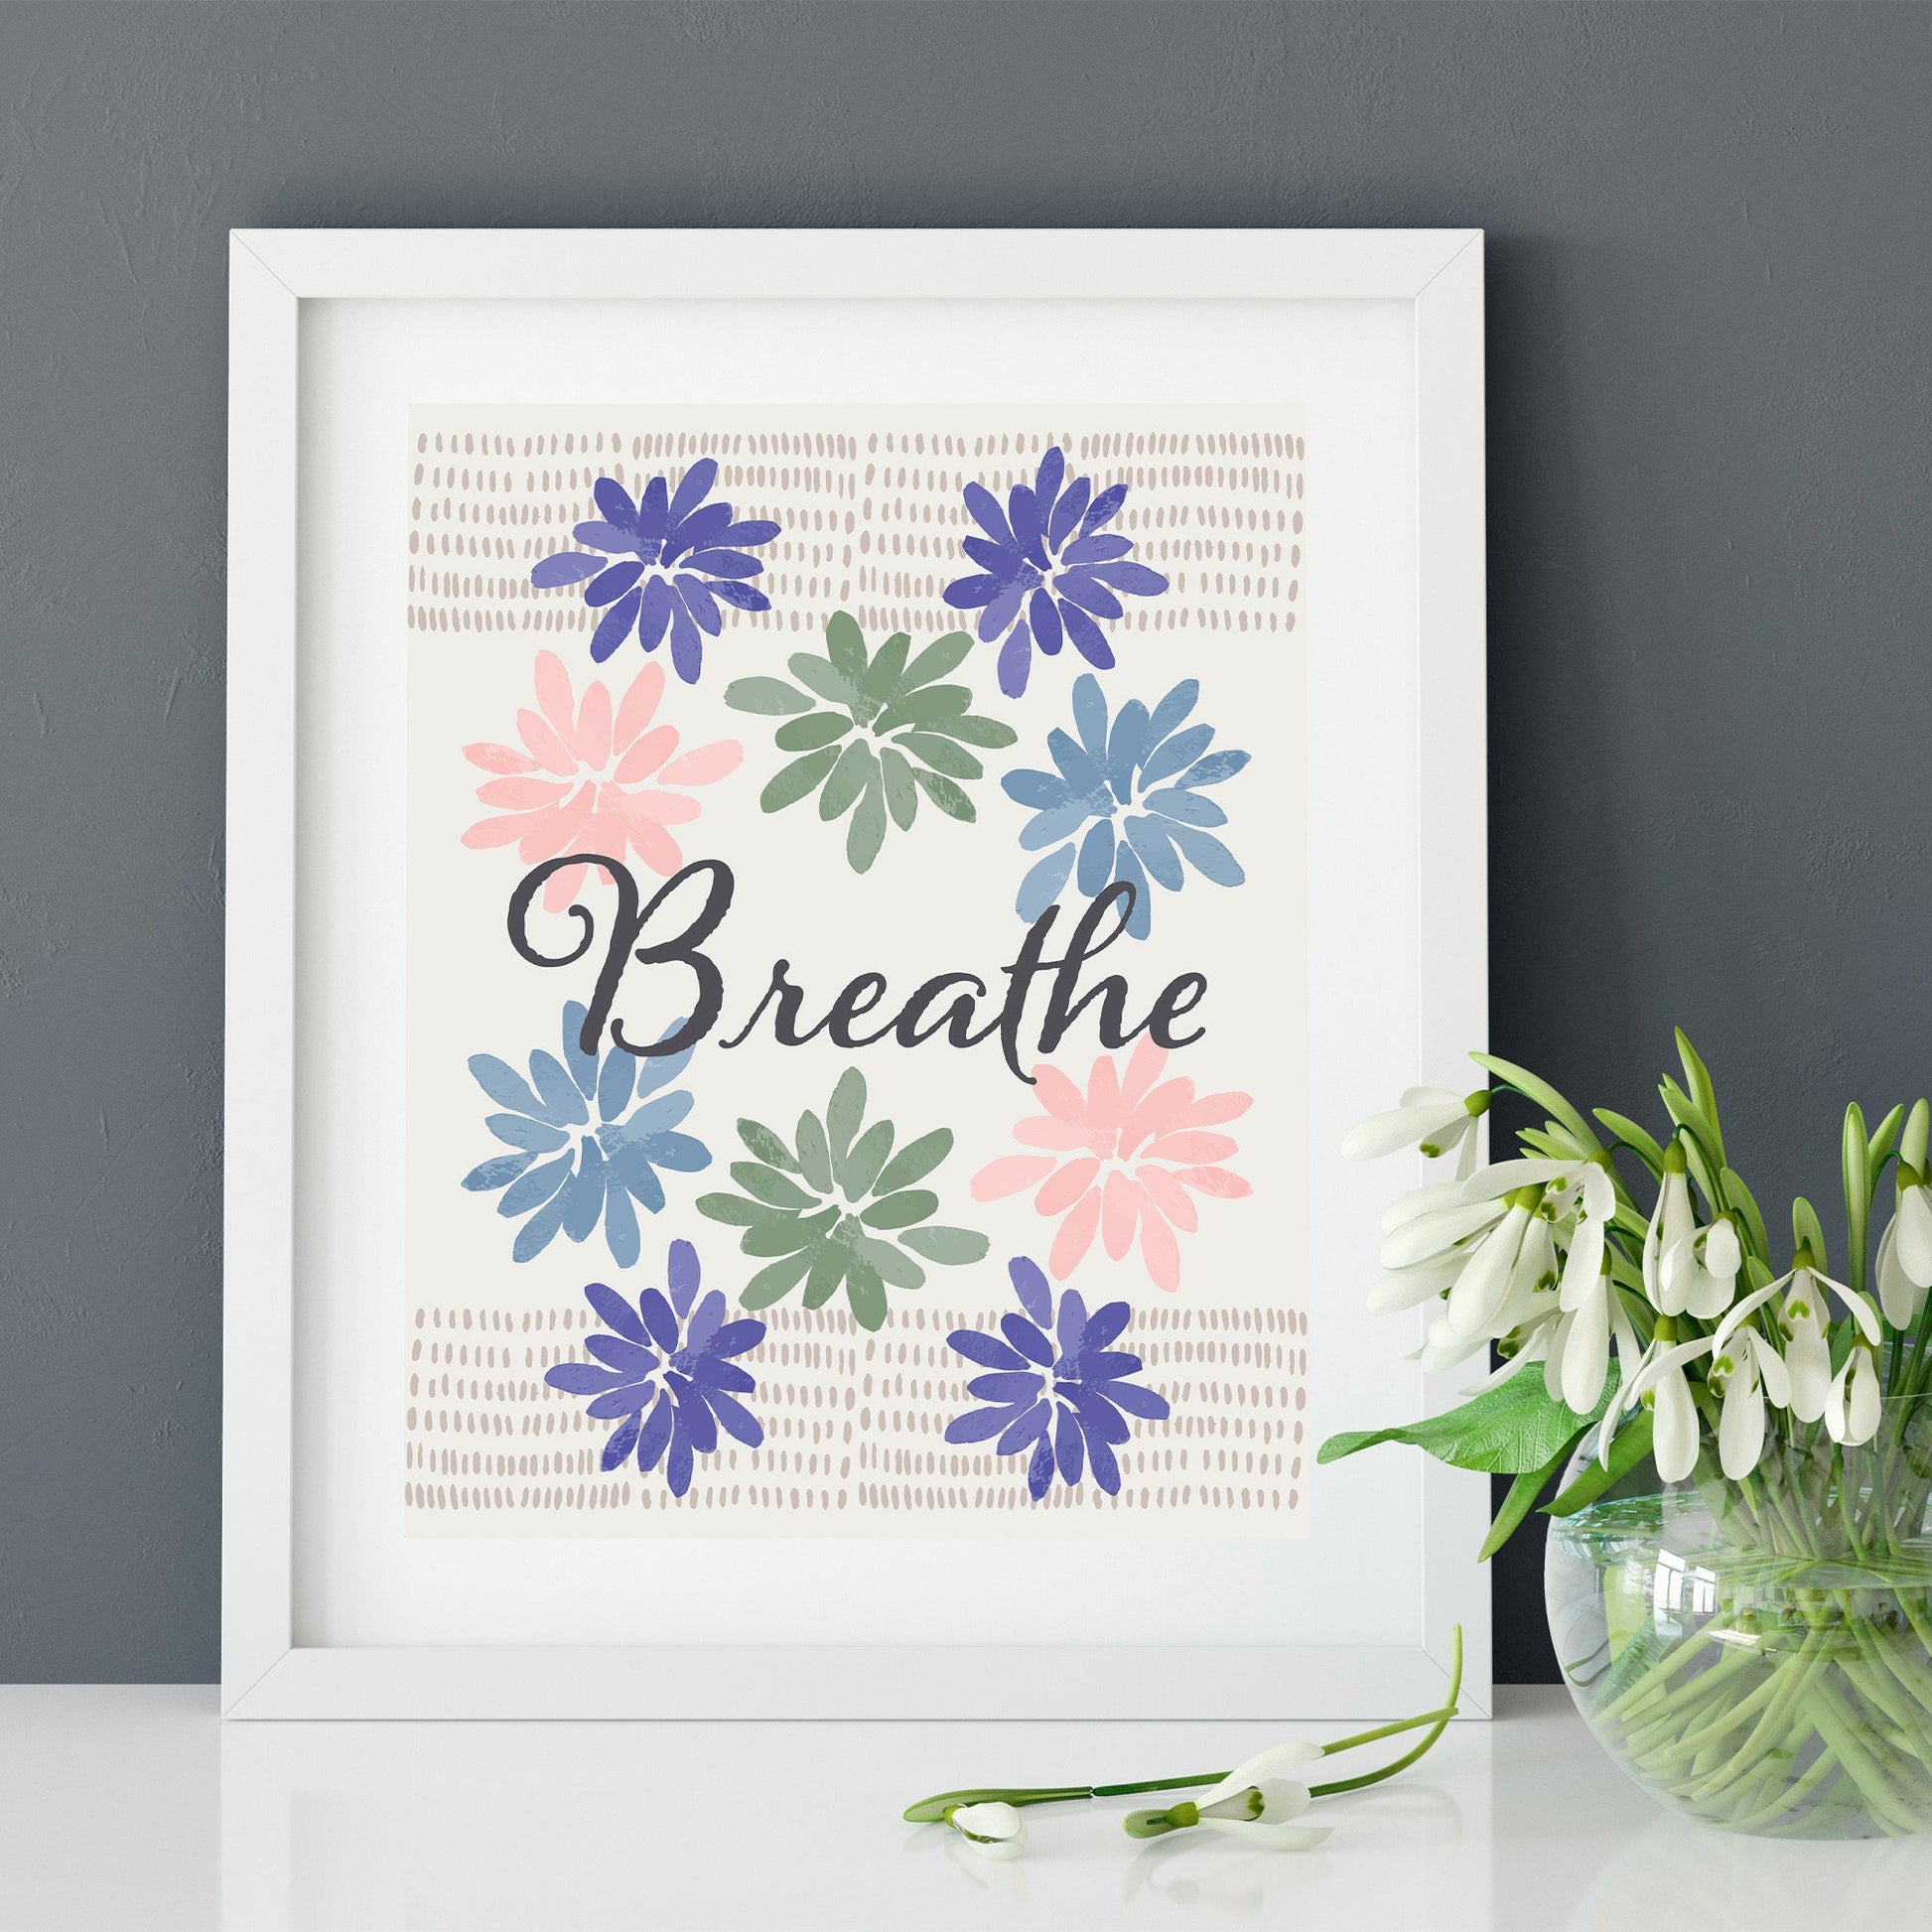 An eco-friendly art print featuring gouache painted flowers and marks with the word "Breathe" in script, shown in a white frame on a white table with white flowers in a vase against a gray wall.